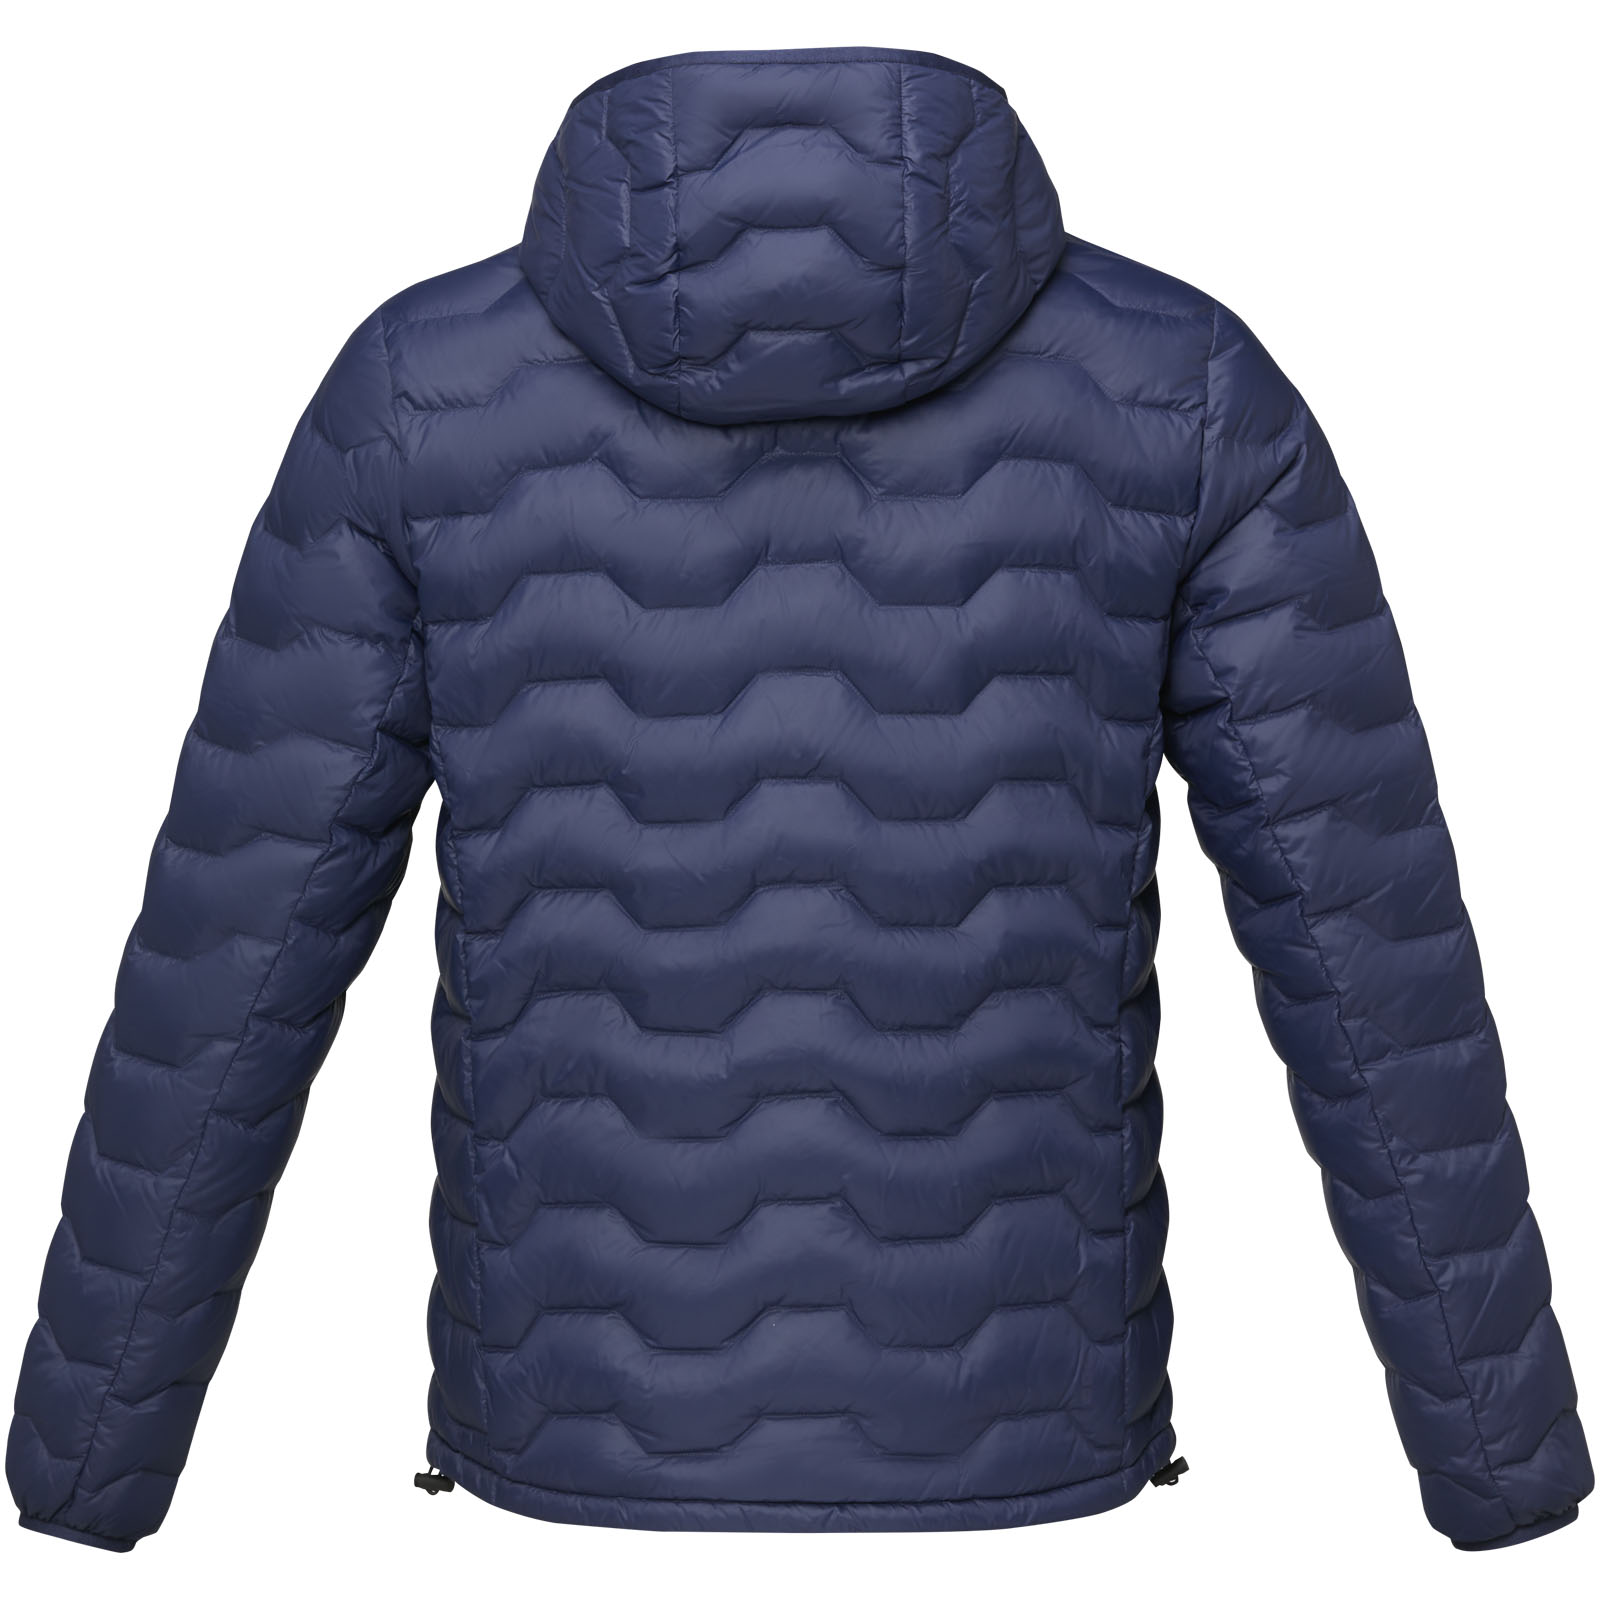 Advertising Jackets - Petalite men's GRS recycled insulated down jacket - 2